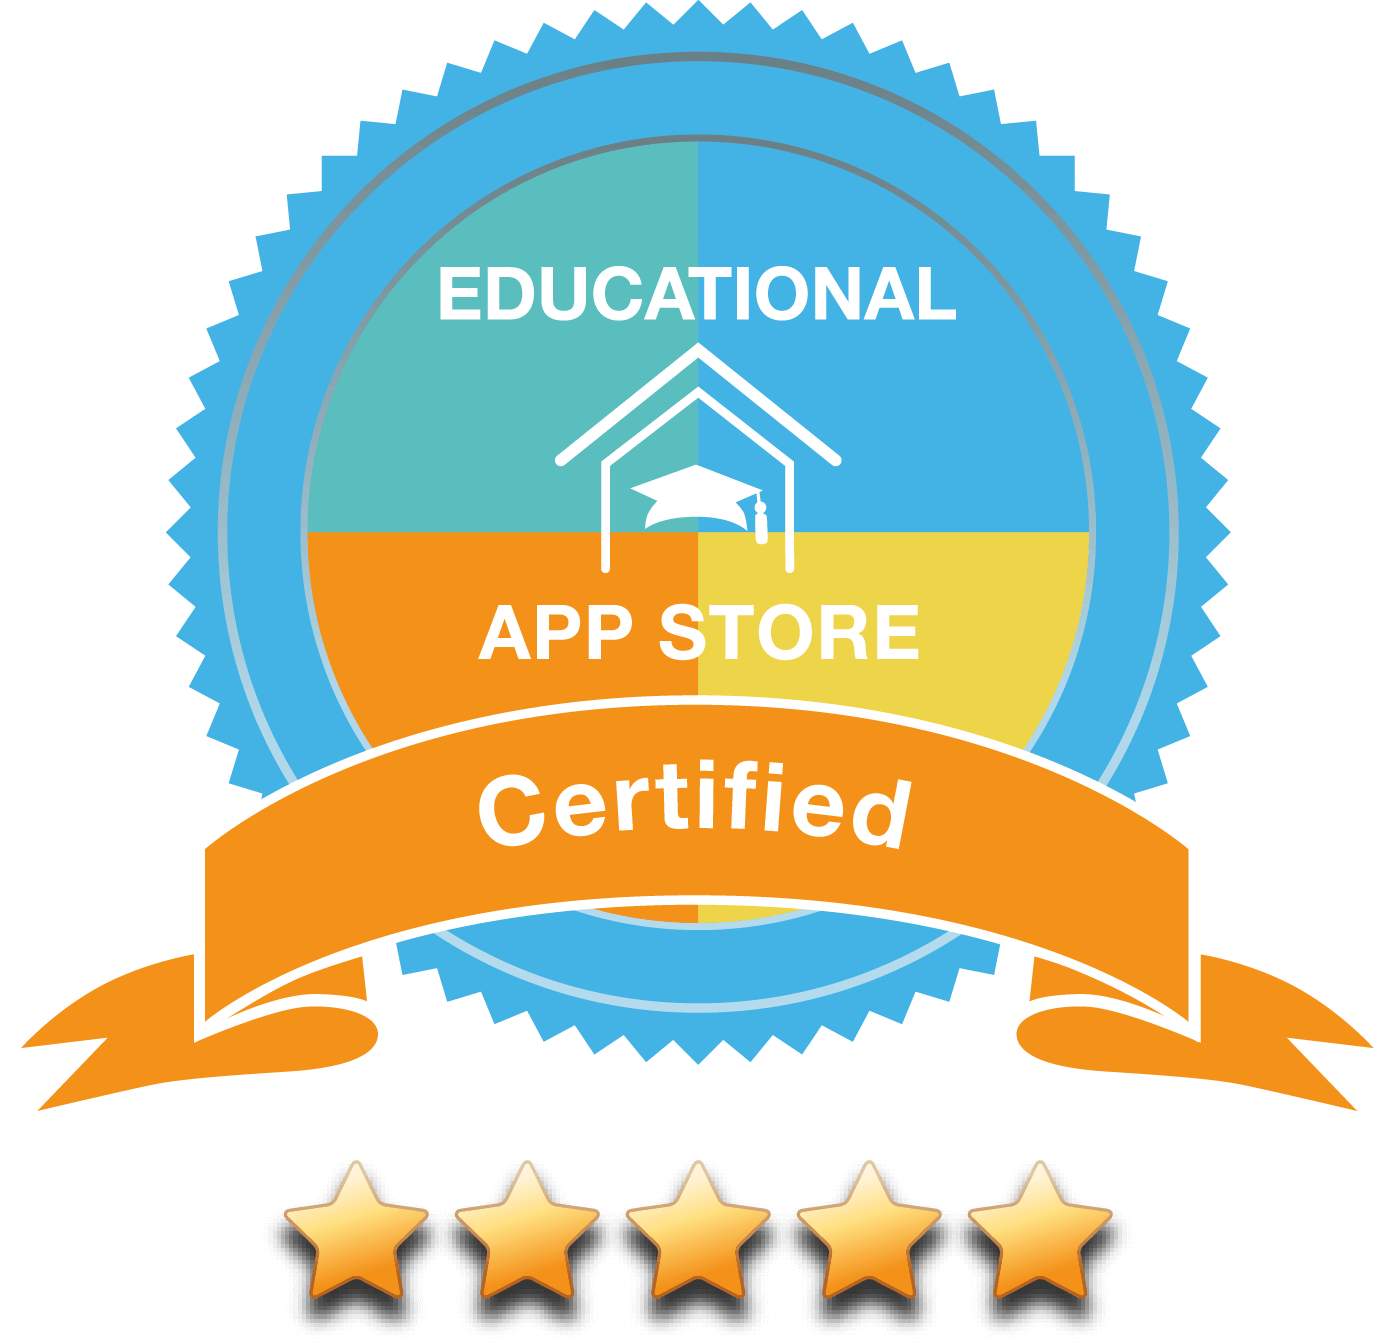 Certified by the Educational App Store